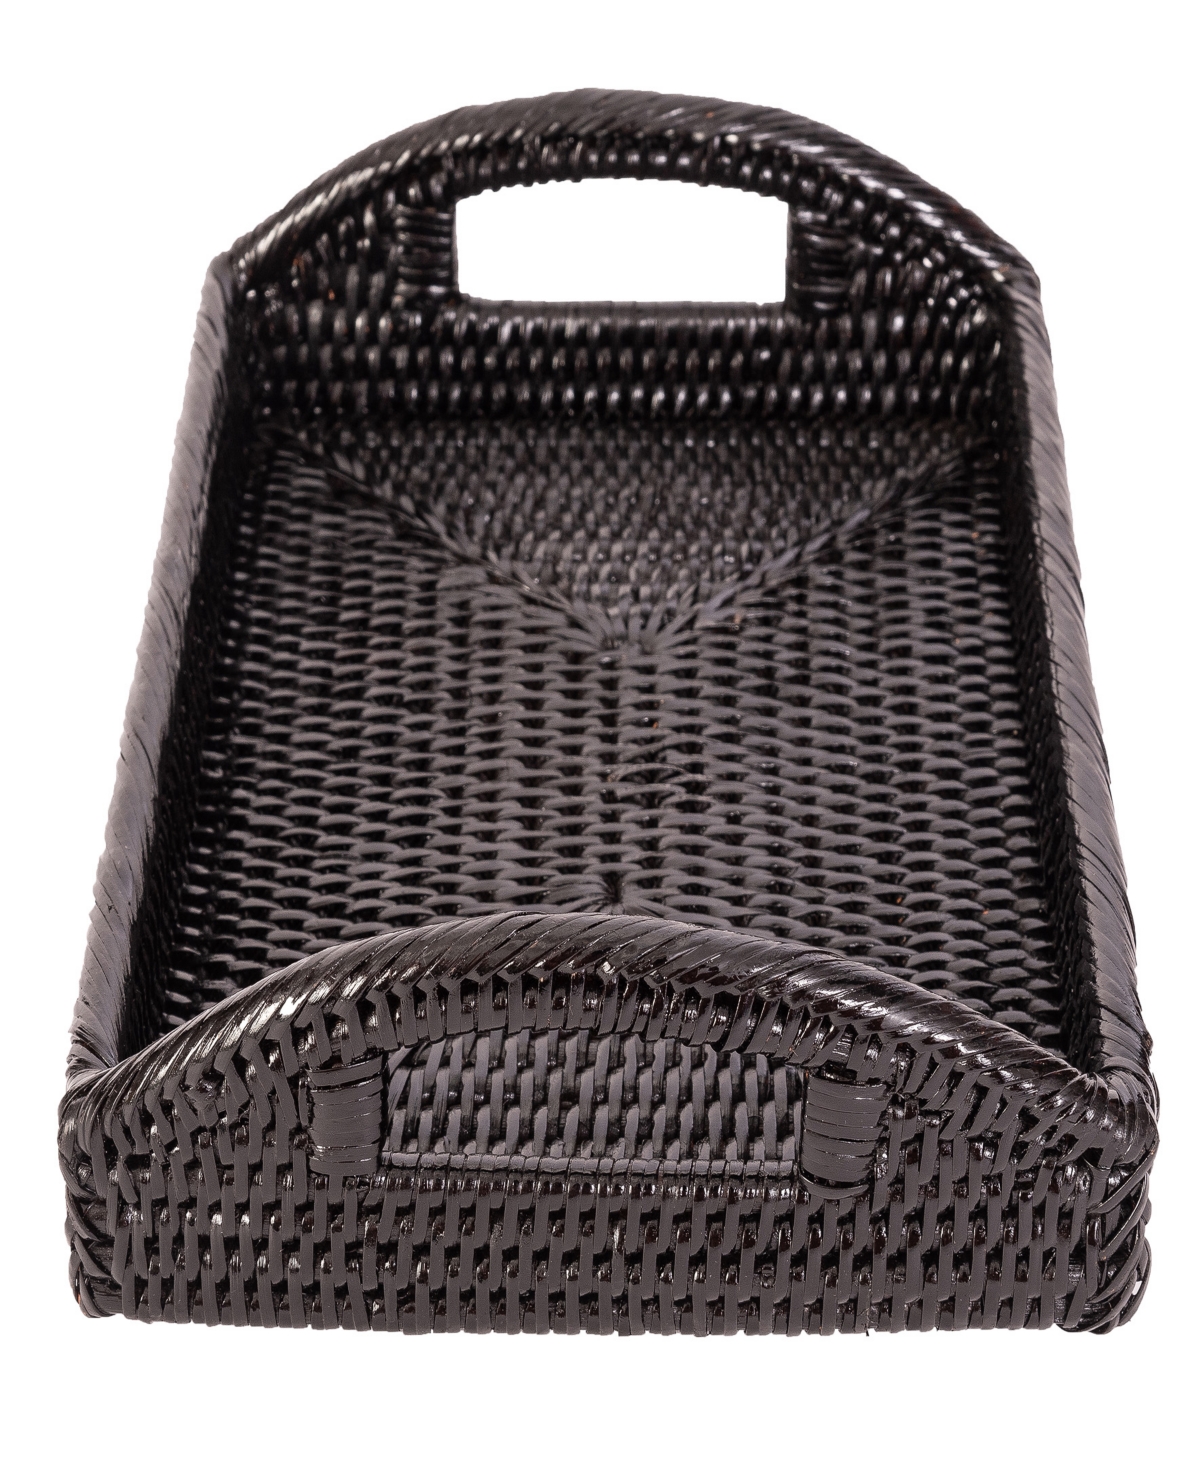 Shop Artifacts Trading Company Rattan Rectangular Vanity Tray With High Handles In Tudor Black